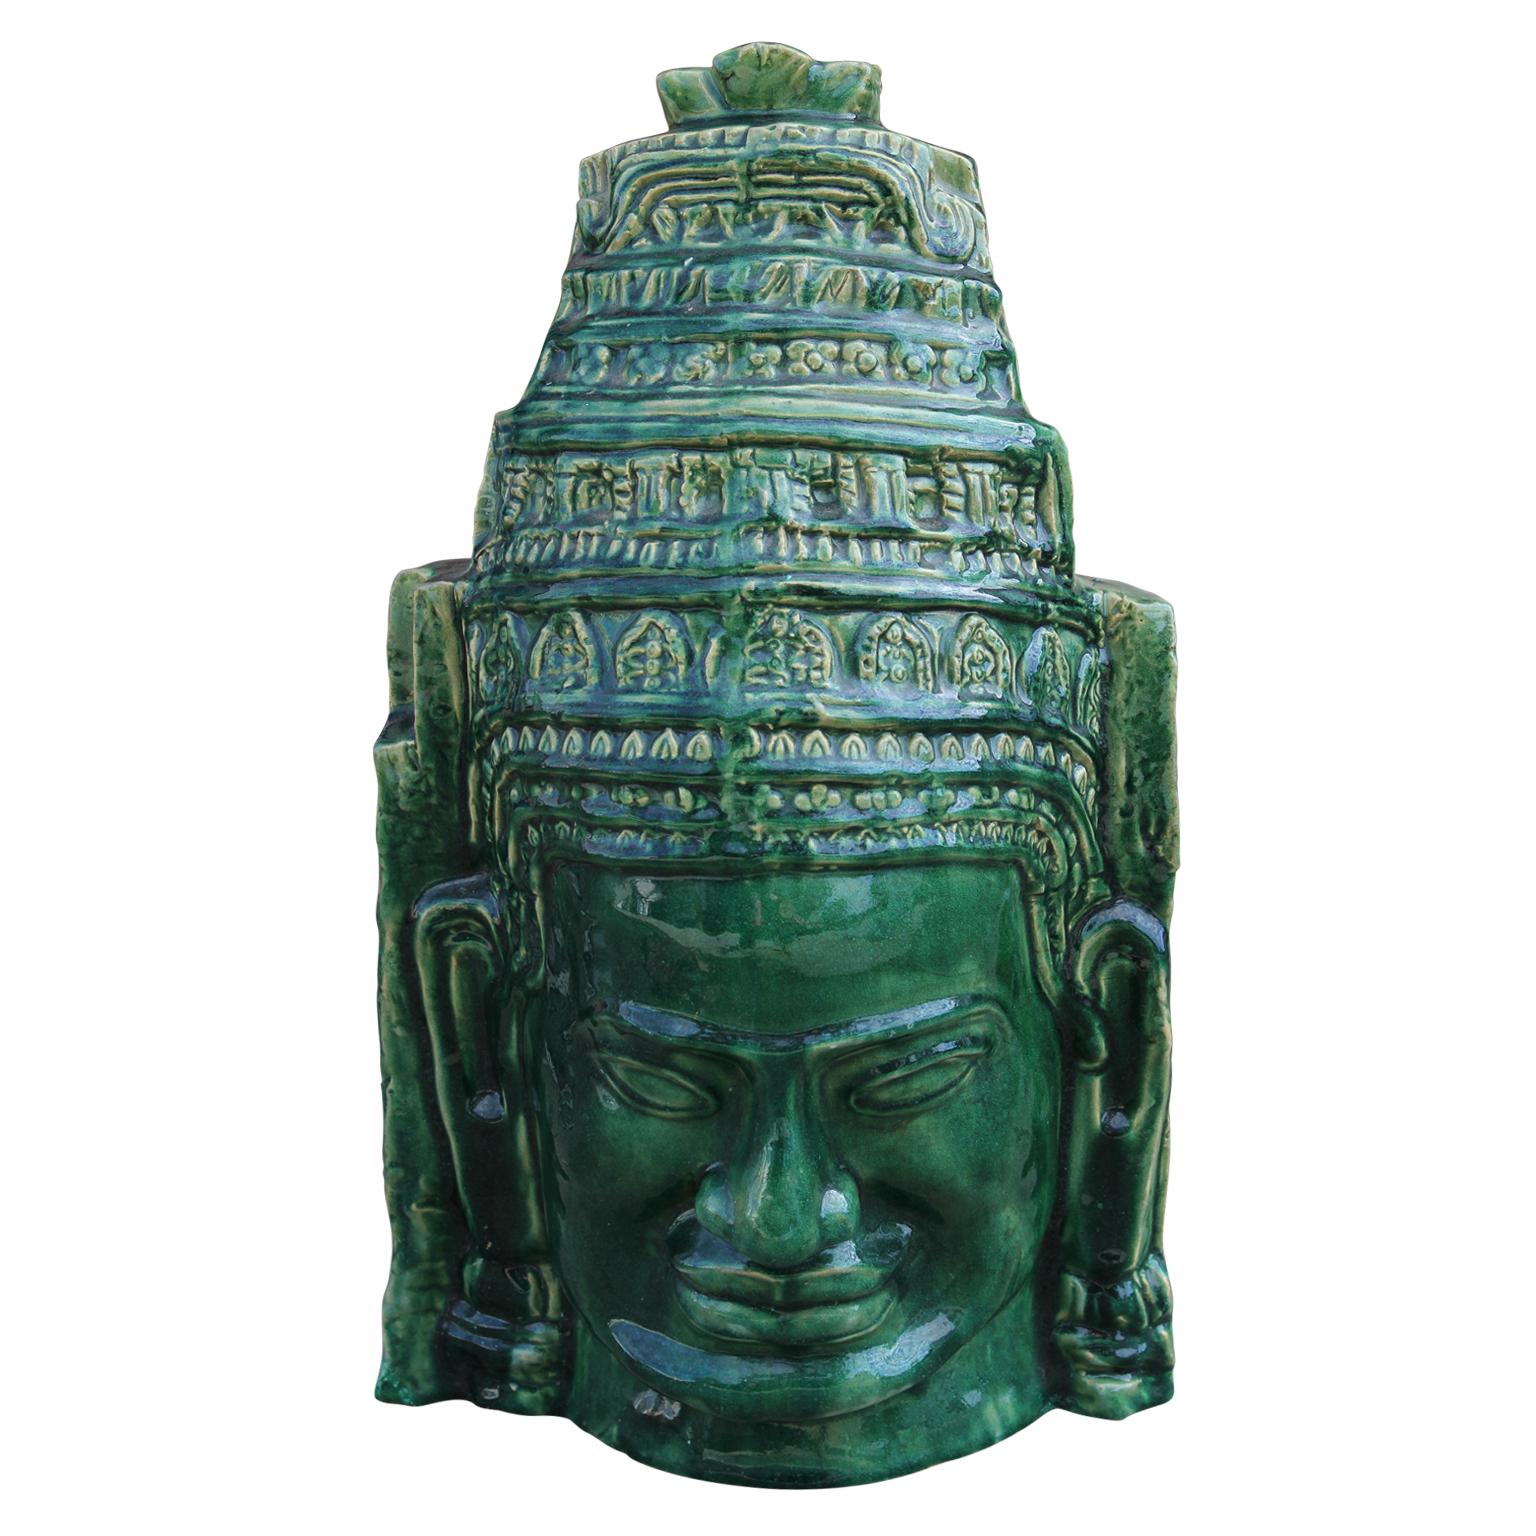 Unknown Figurative Sculpture - Green Cambodian Angkor Wat Mask Clay Sculpture